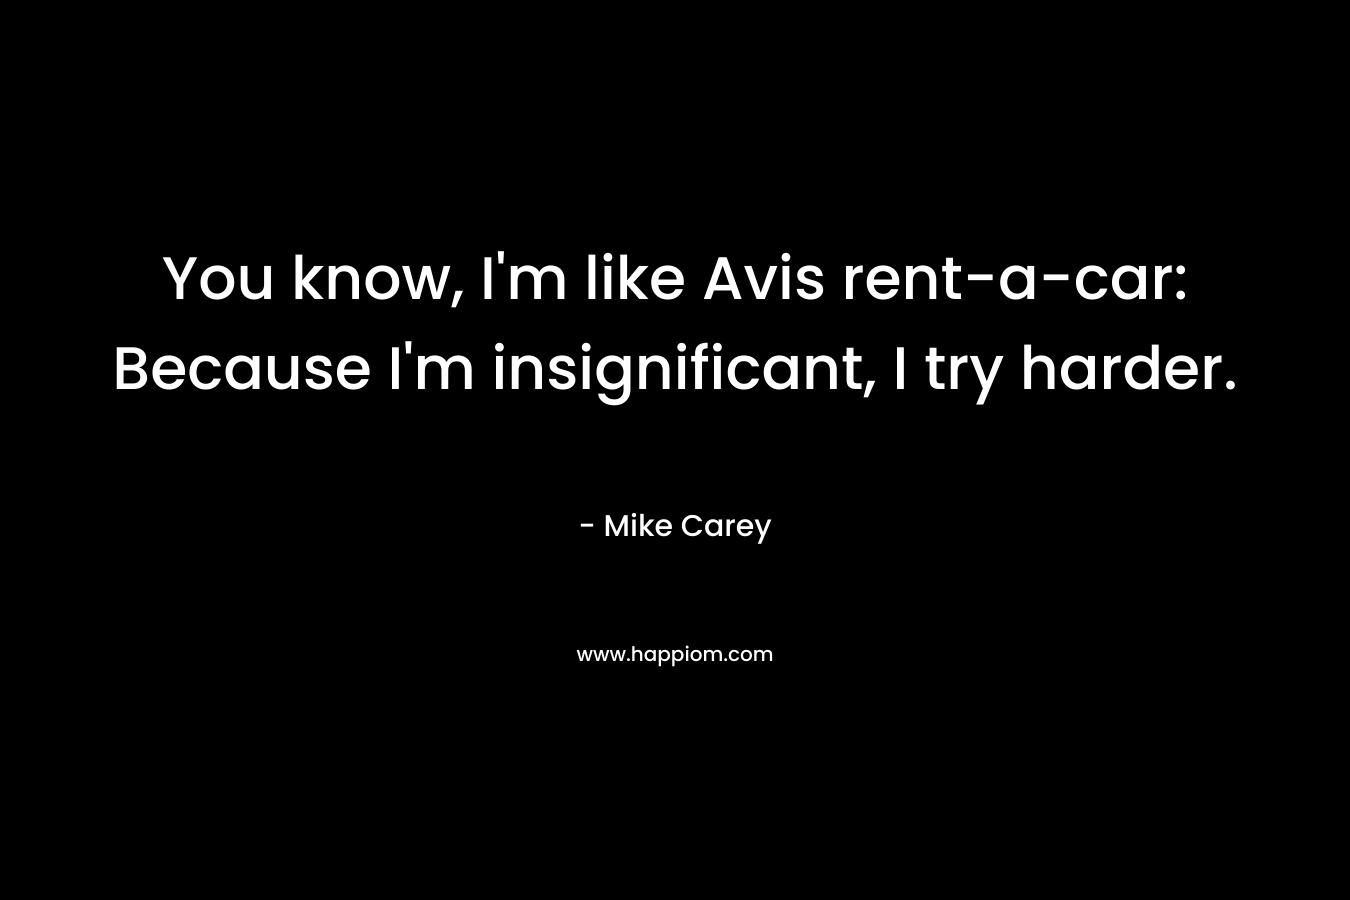 You know, I'm like Avis rent-a-car: Because I'm insignificant, I try harder.